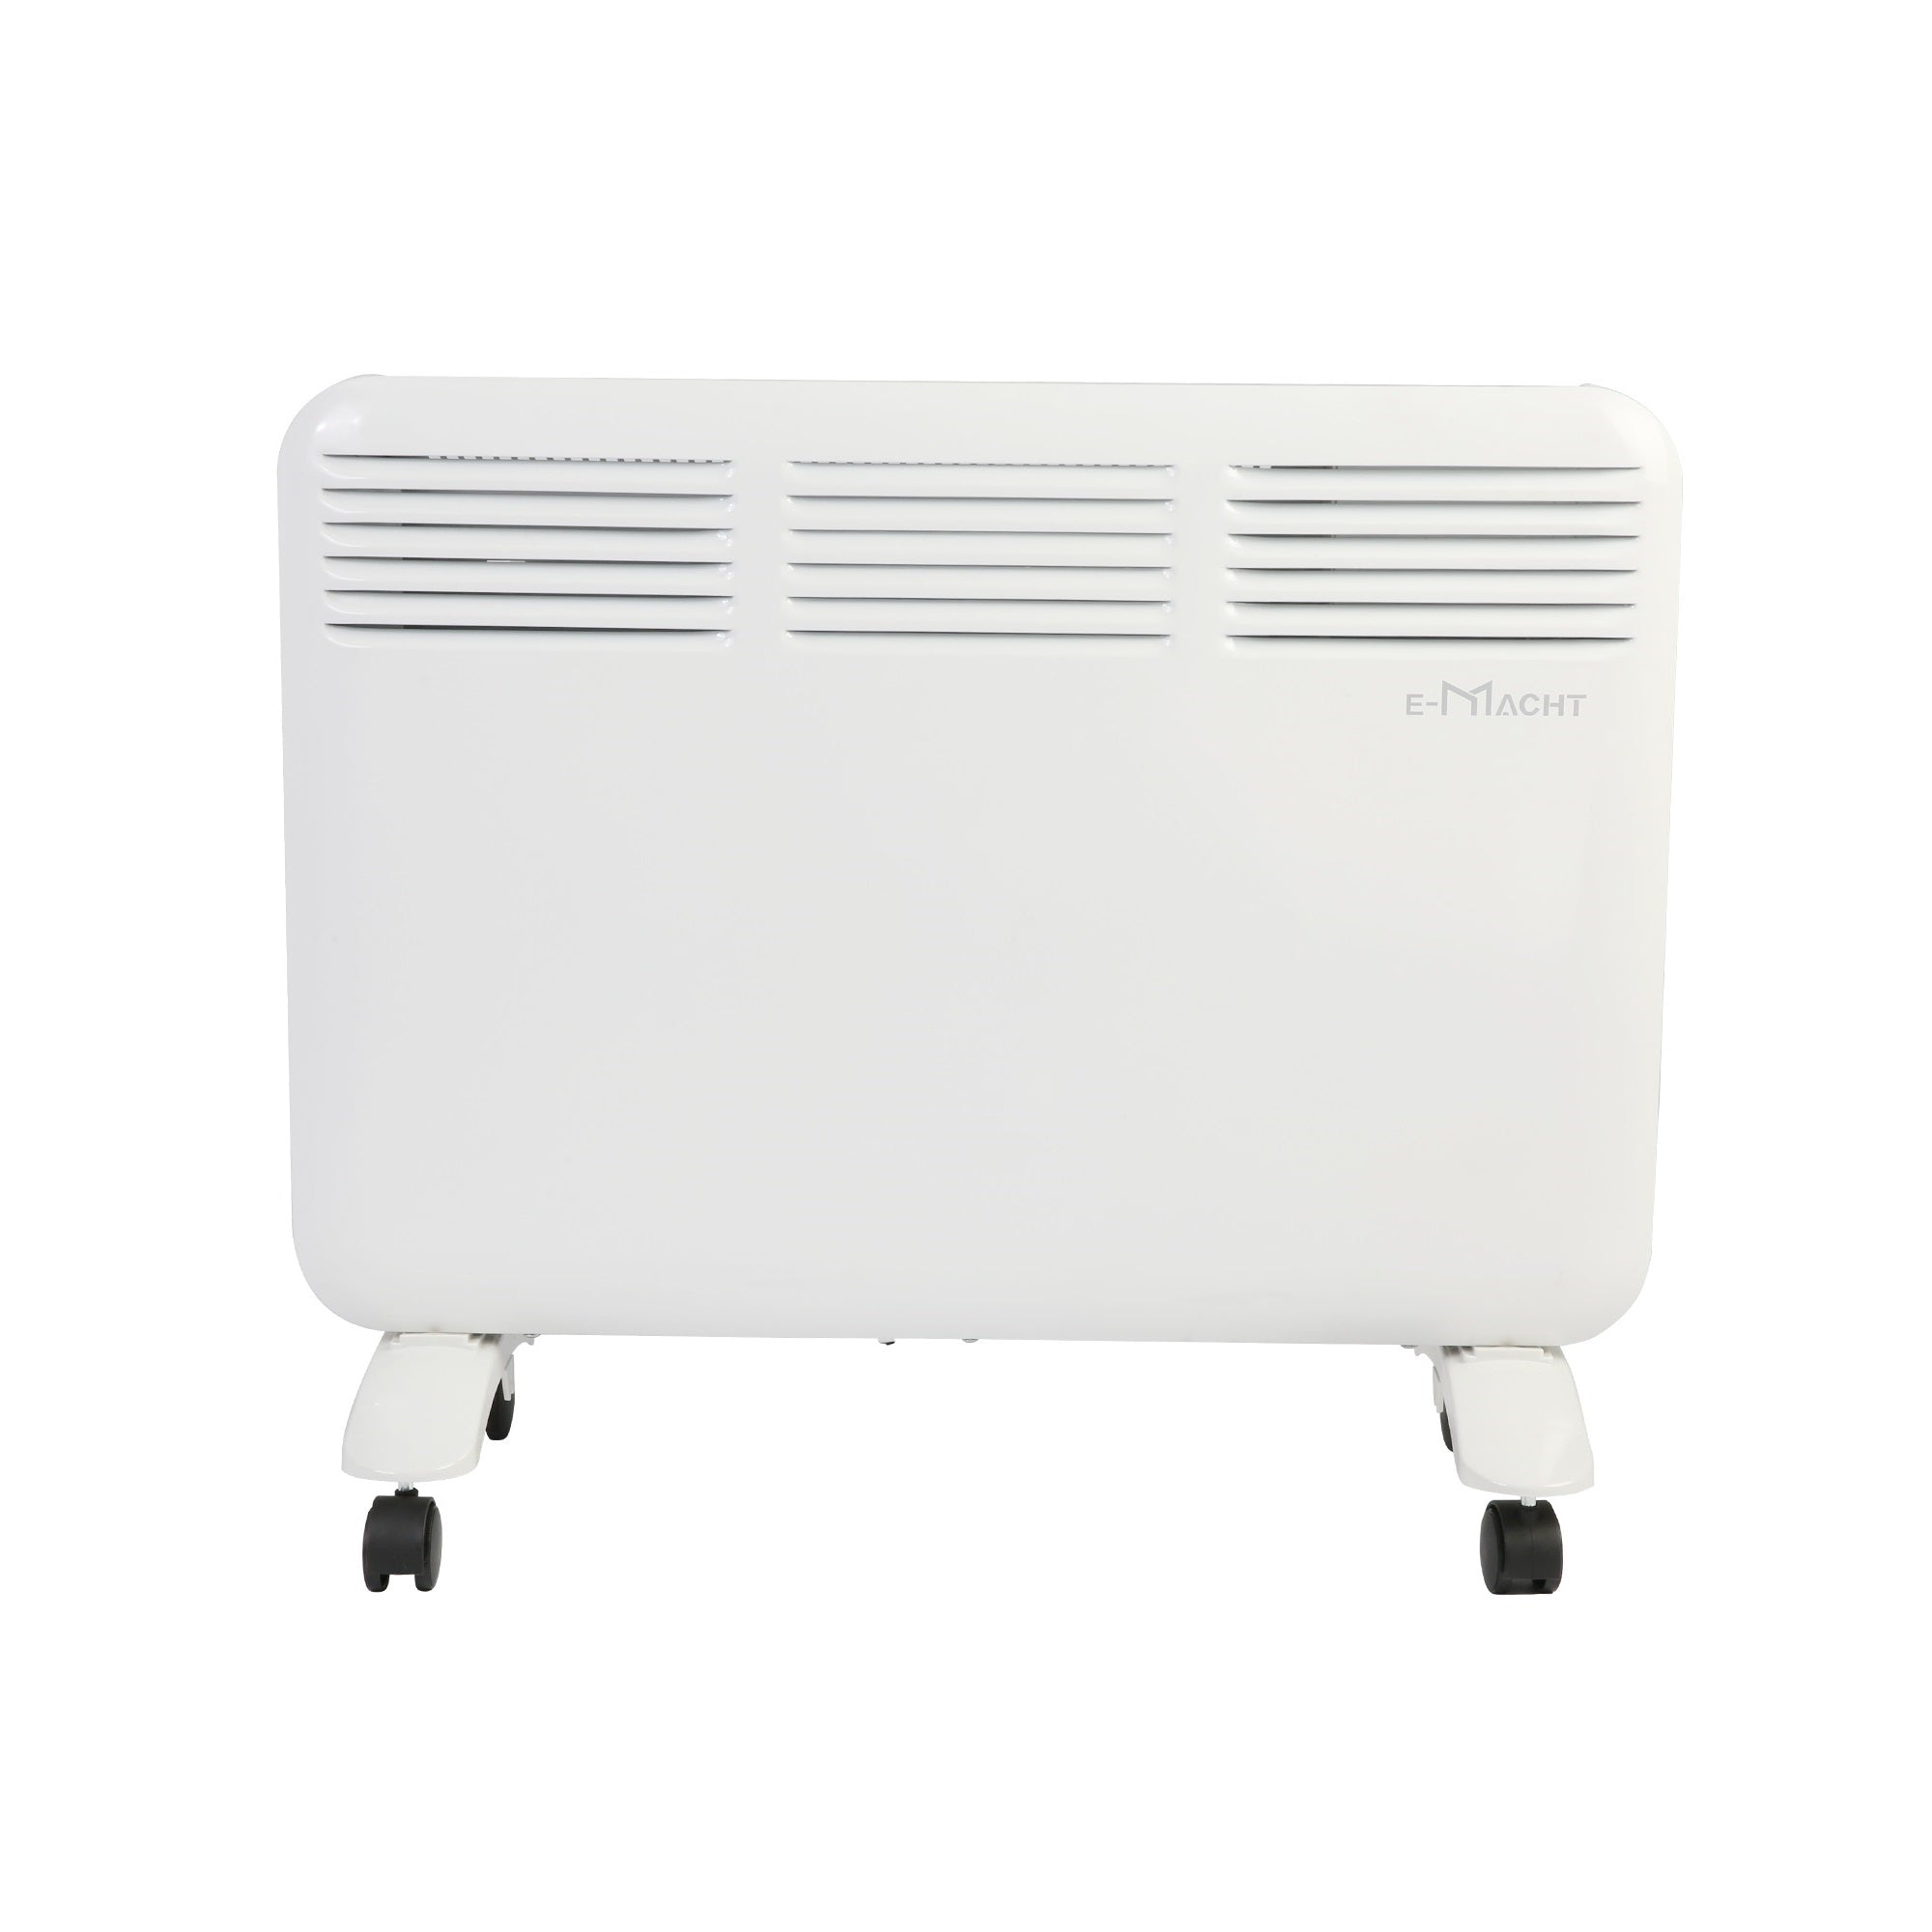 1000W Electric Convector Heater with Wheels Freestanding/Wall Mounted Smart Space Heater Panel | karmasfar.com